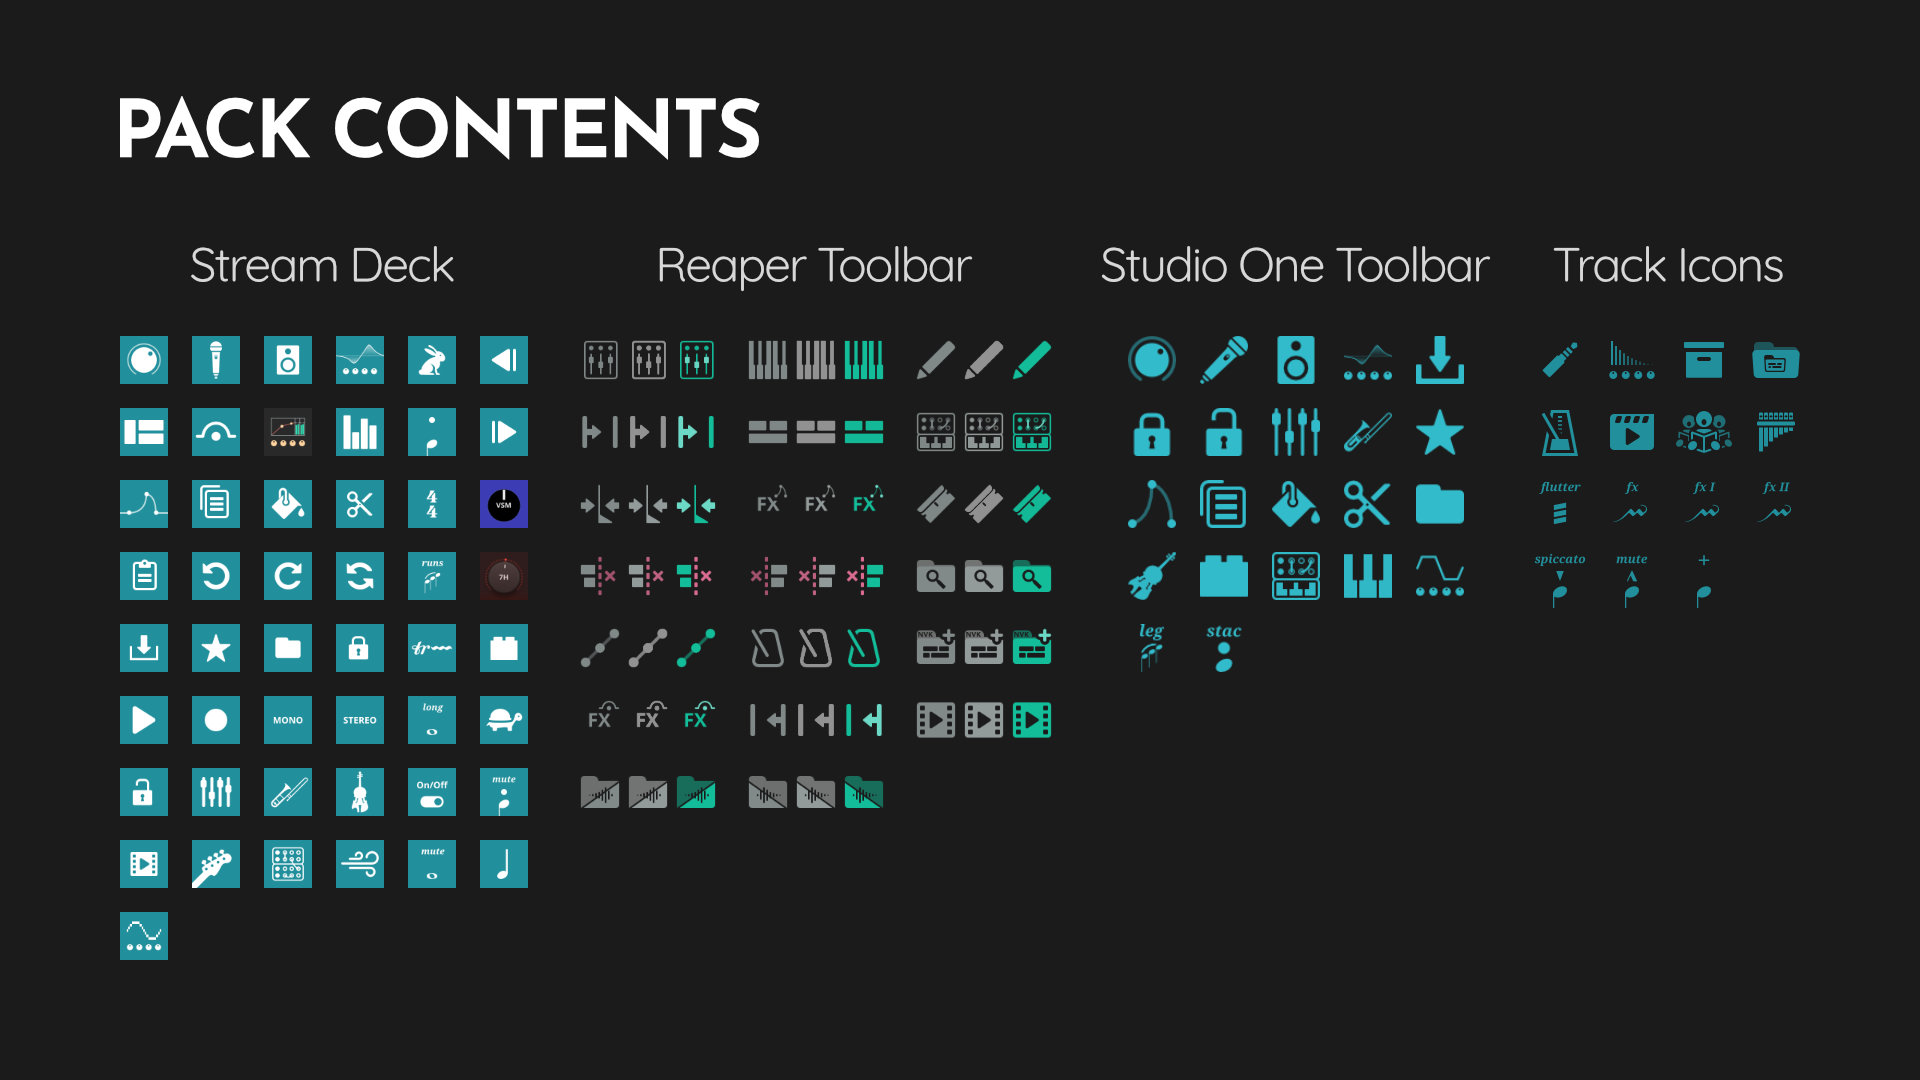 Package contents. Free icons for Stream Deck, Reaper, Studio One and Track Icons.